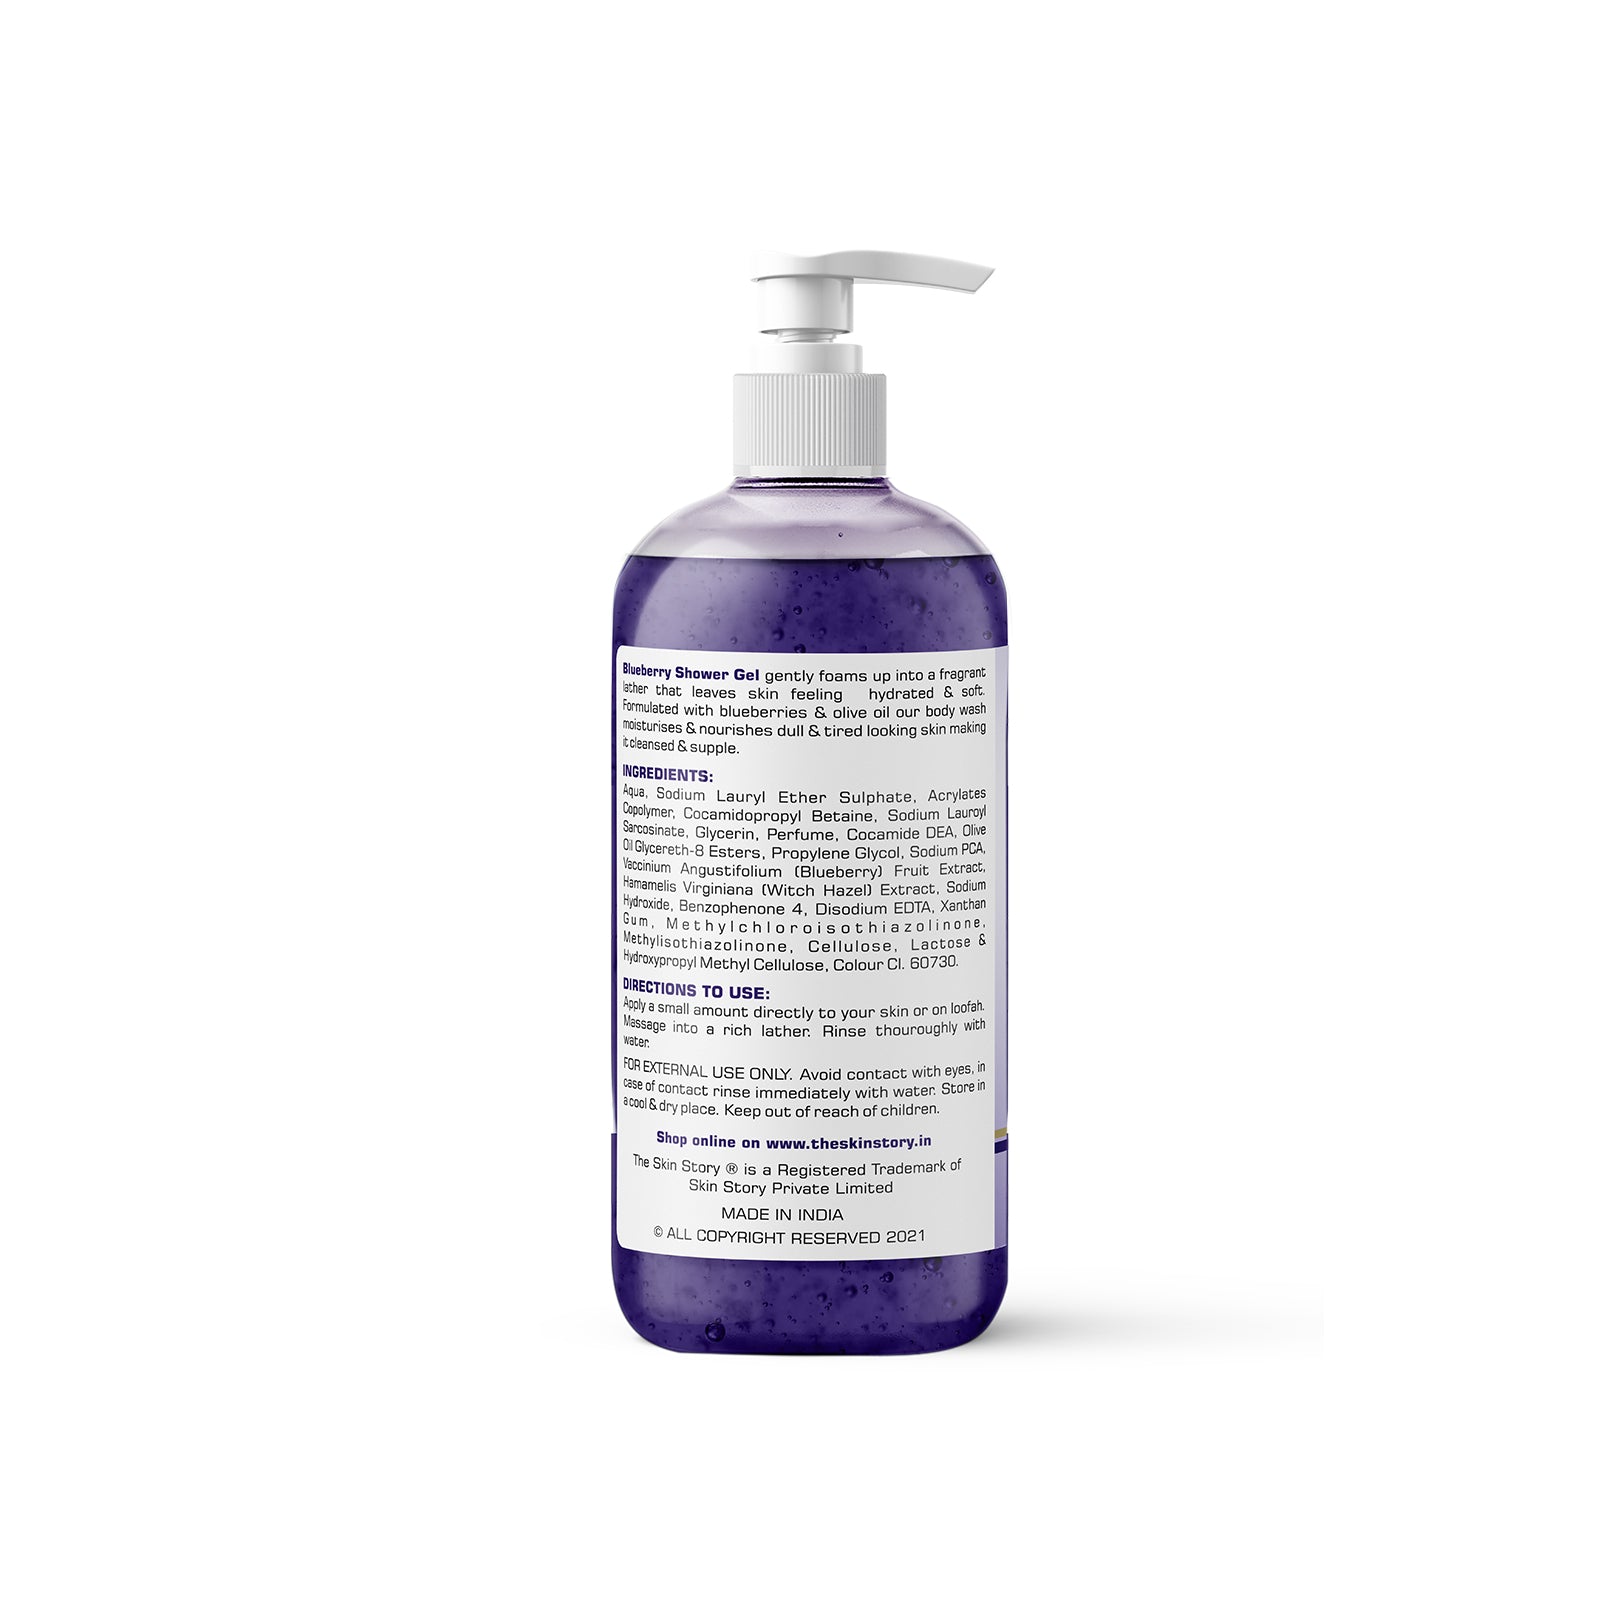 The Skin Story Refreshing Daily Shower Gel |Foaming & Deep Cleansing |Blueberry & Shea Butter Body Wash | 190ml